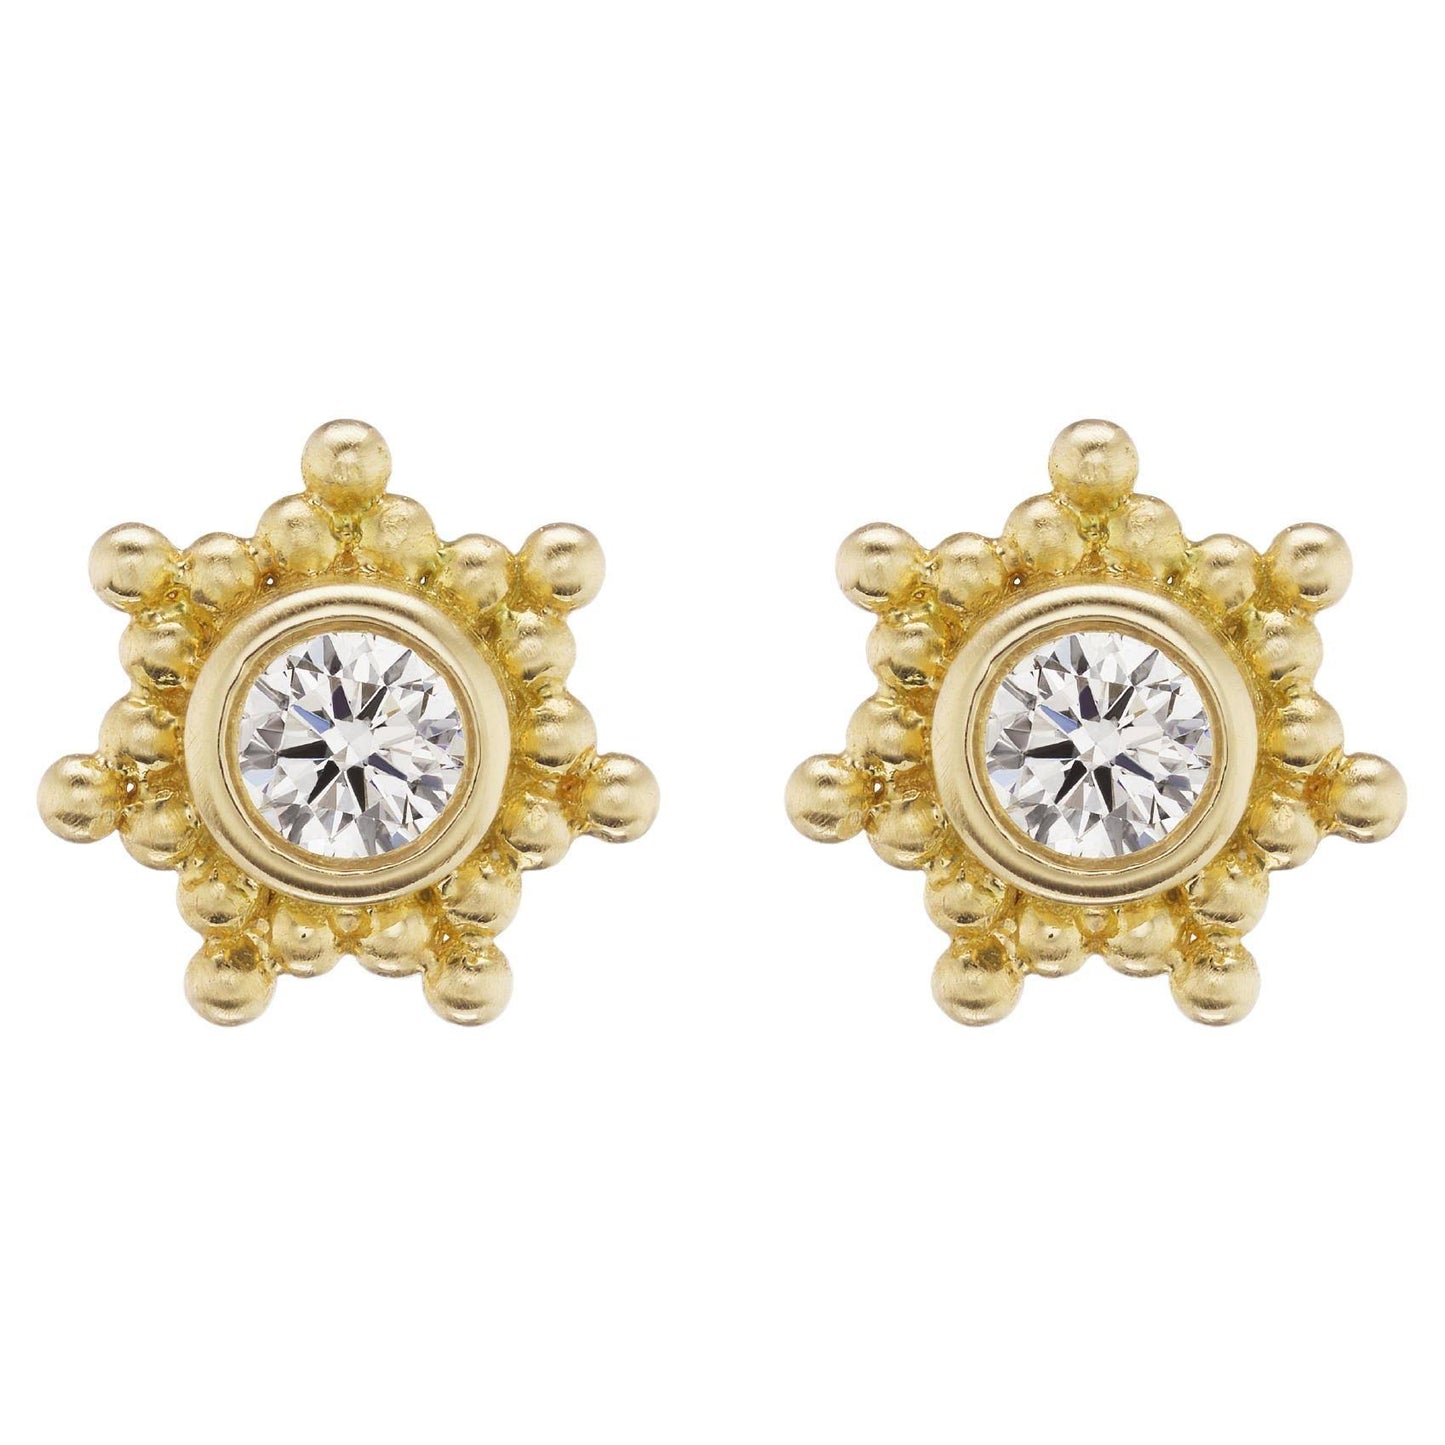 Emily Weld Collins Granium Star Earrings with Diamonds